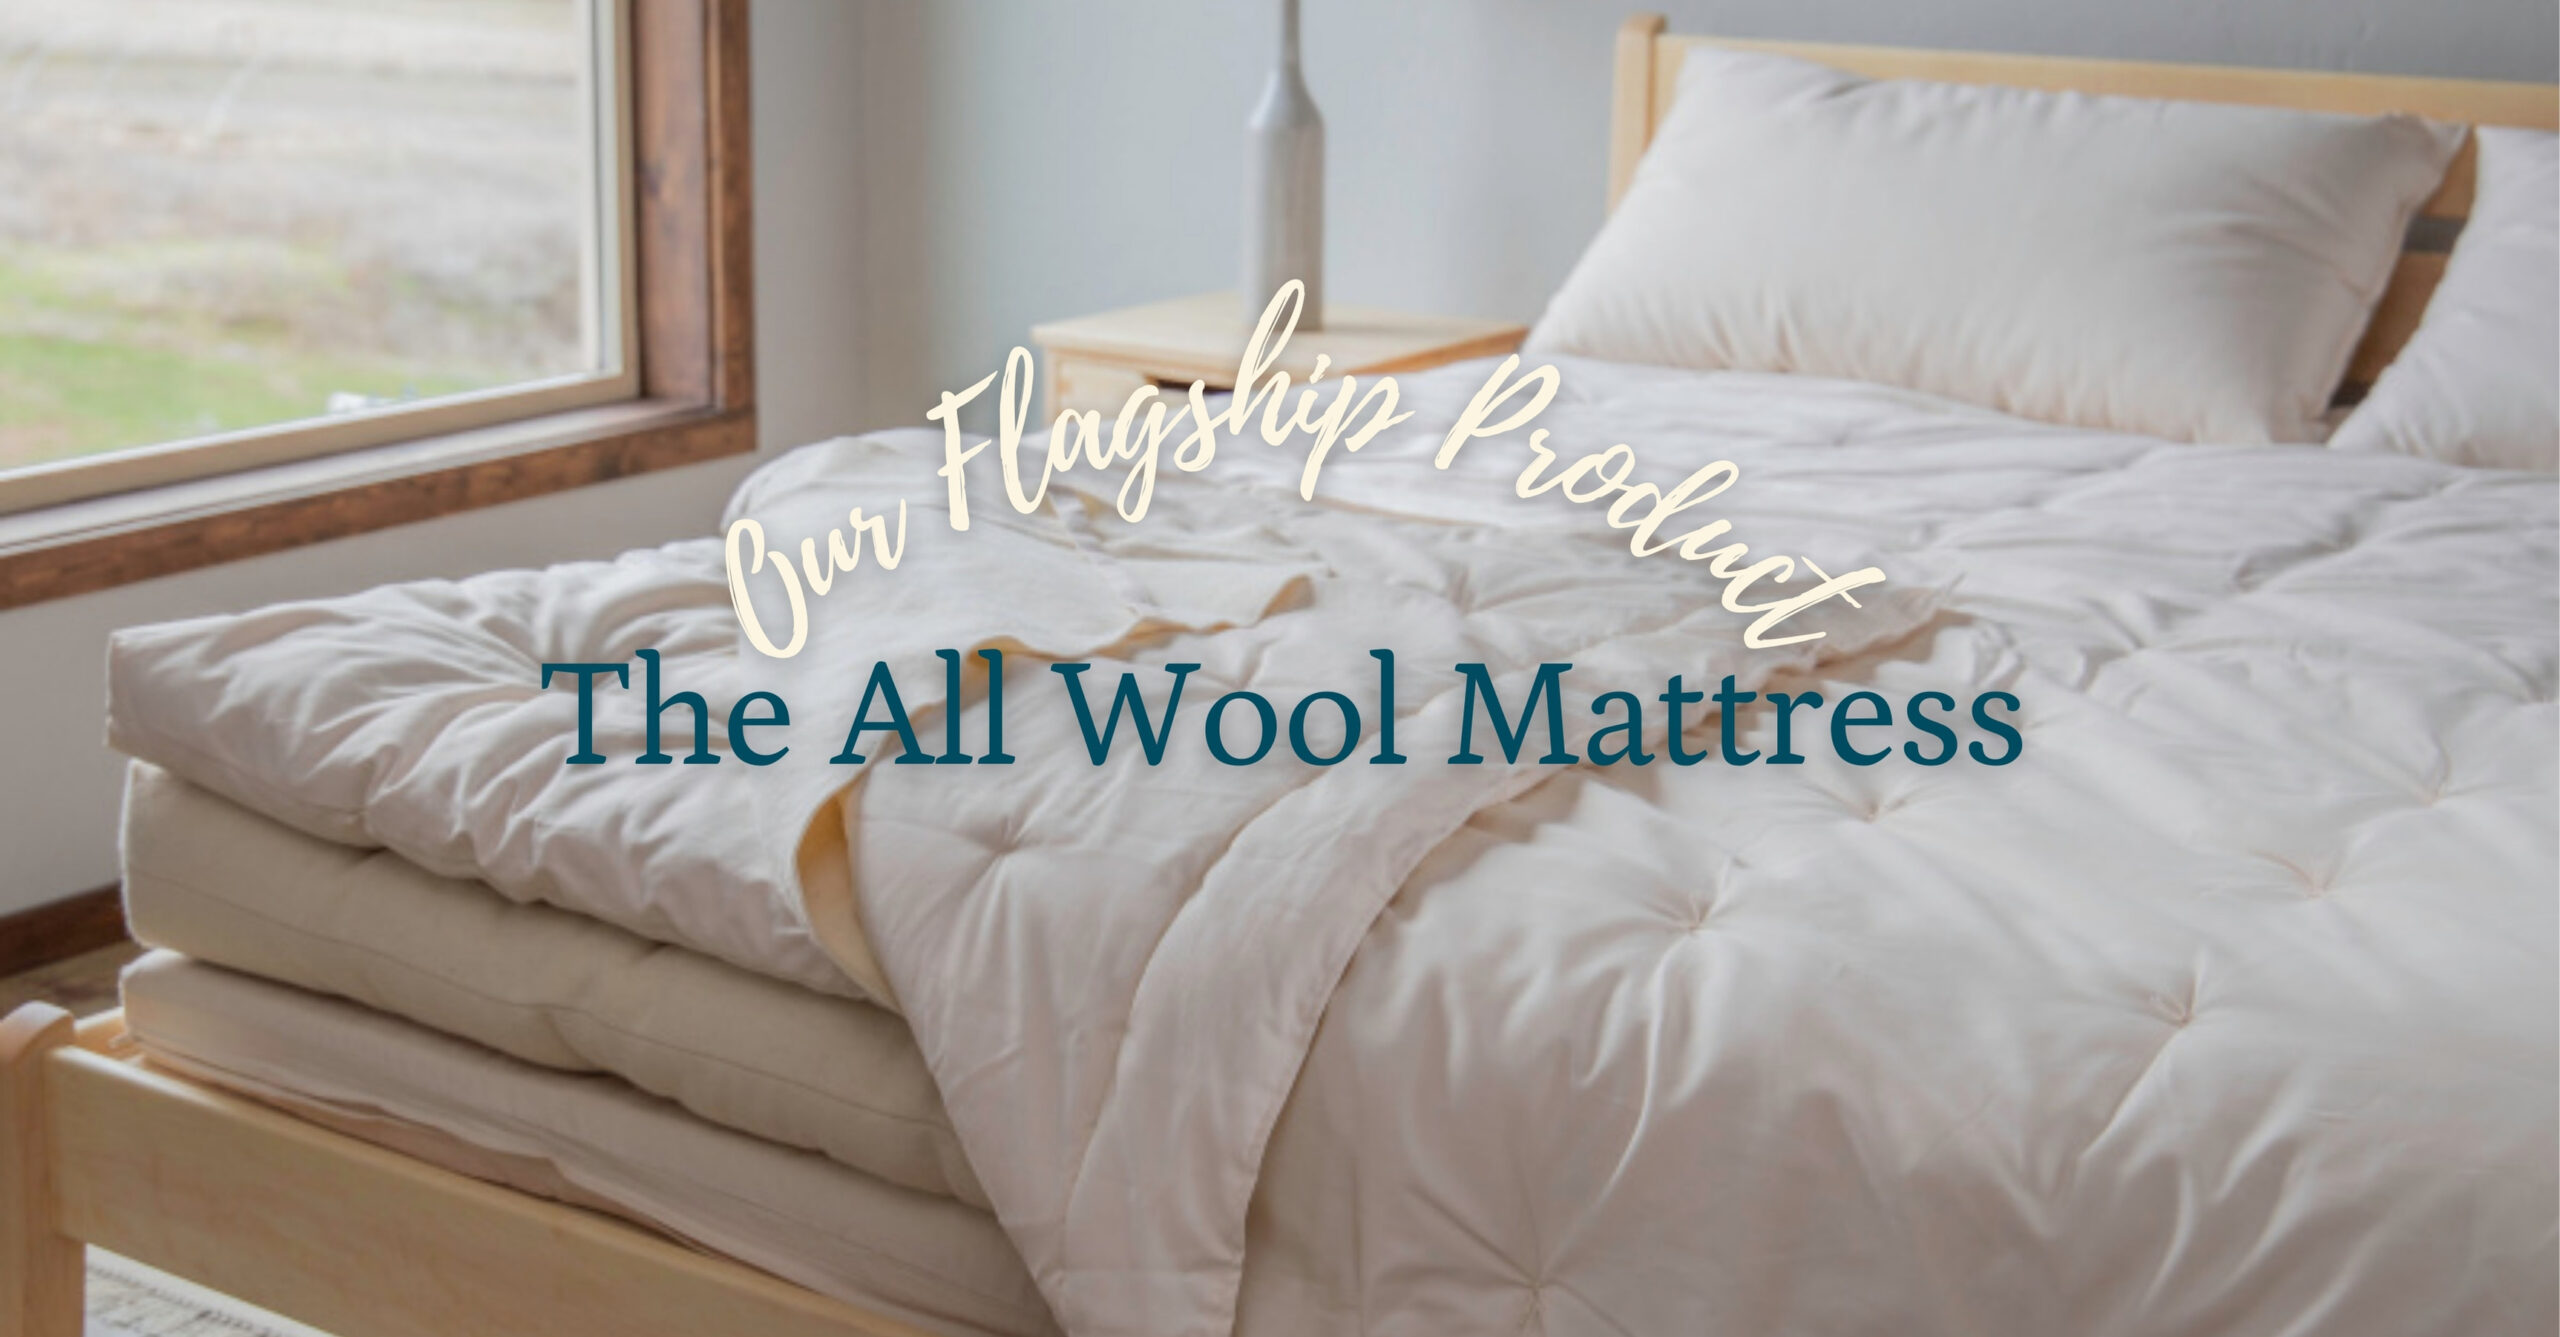 Our Flagship Product: The All Wool Mattress 3